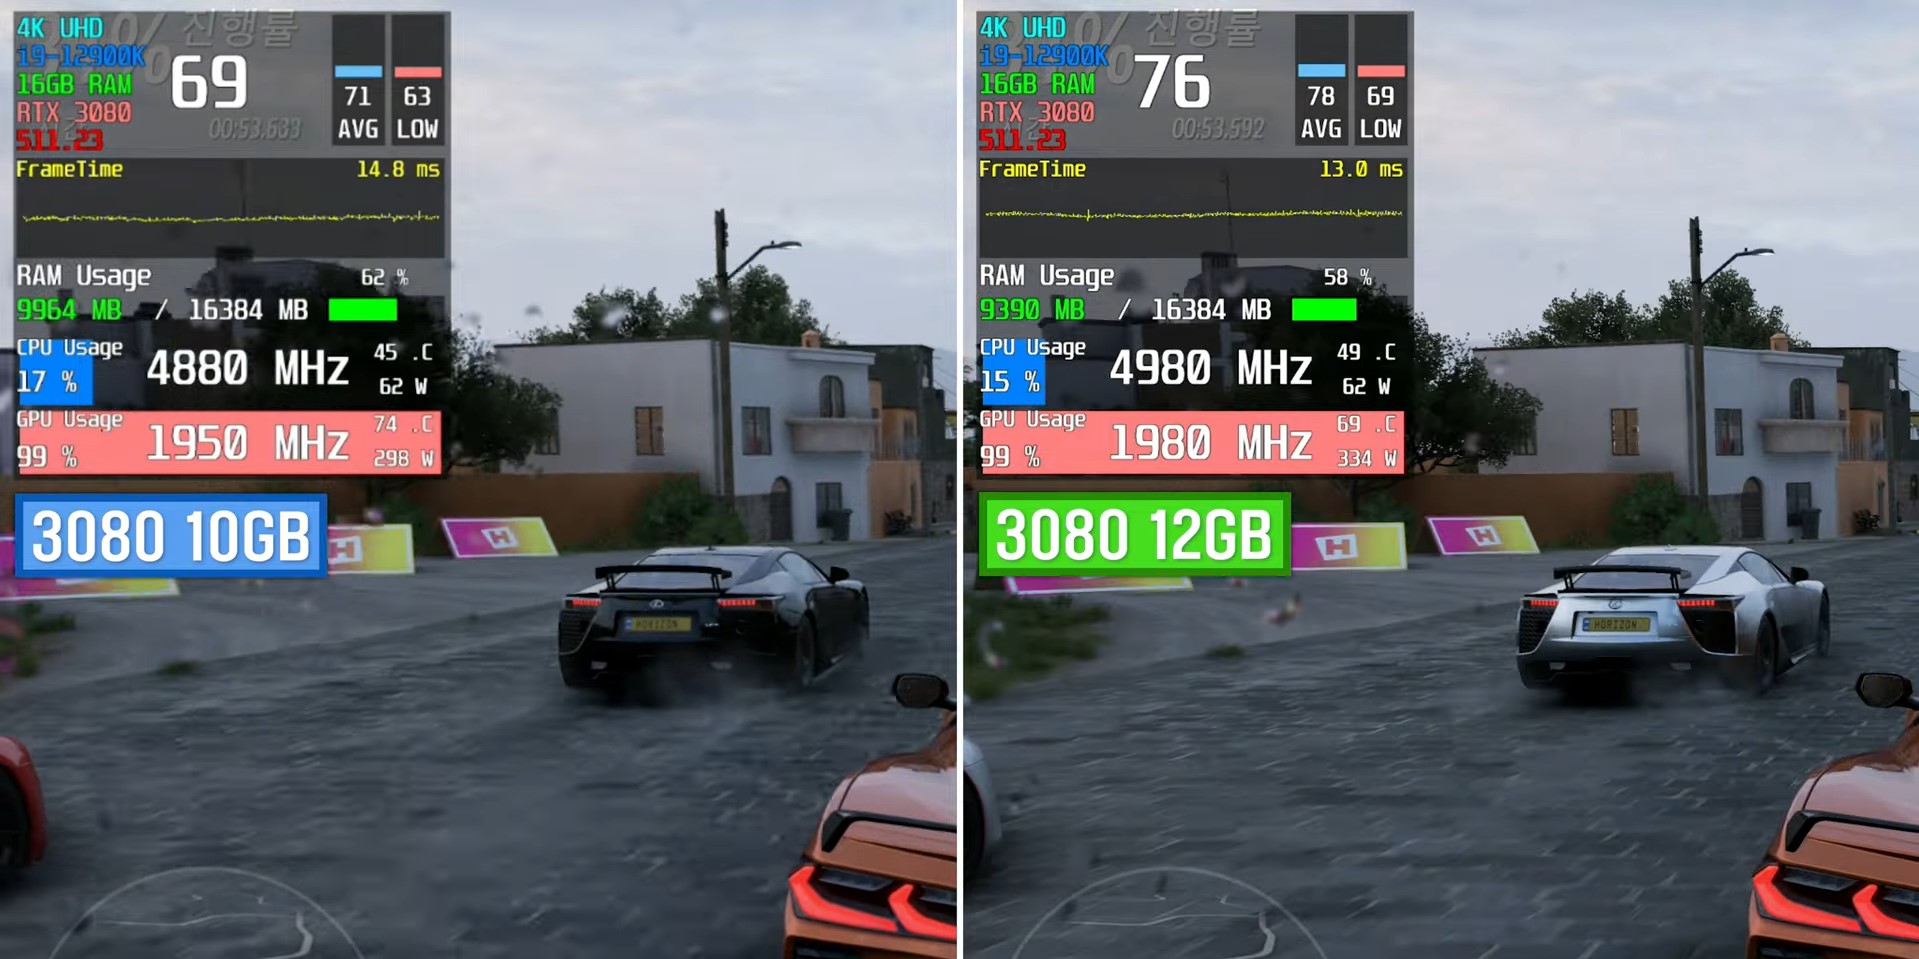 Benchmark Test of Forza Horizon 5 on RTX 3080 10 GB and RTX 3080 12 GB at 4K